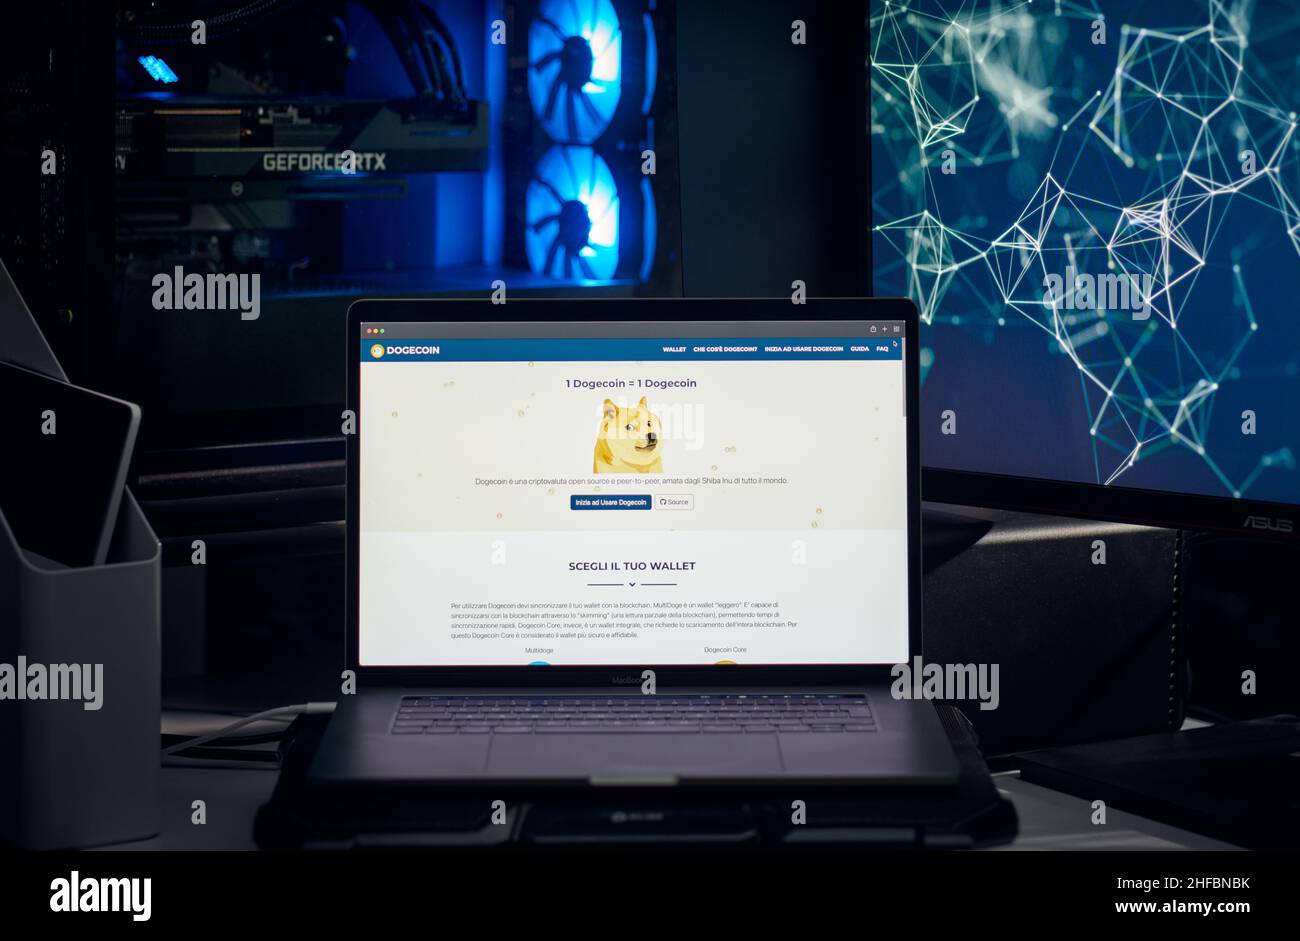 Milan, Italy - January 11, 2022: dogecoin - DOGE website's hp seen on a laptop screen. dogecoin, DOGE coin logo visible. Cryptocurrency, defi, nft con Stock Photo